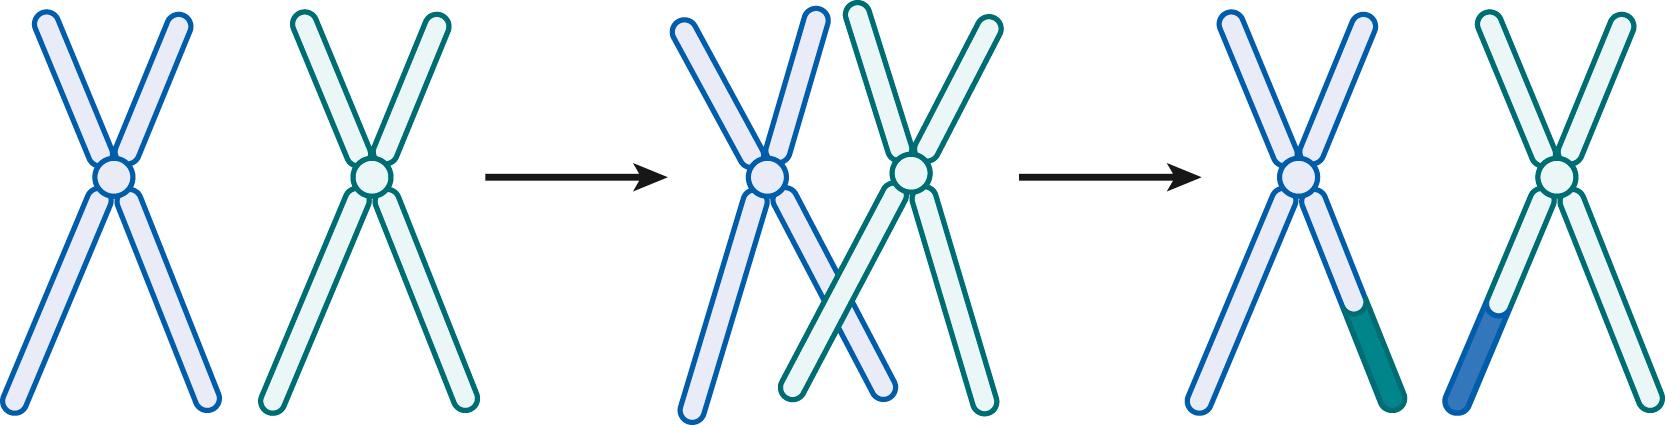 Fig. 1.3, Recombination. In this simplified view of recombination, the two members of a homologous pair of chromosomes line up during the first meiotic prophase. Segments of the two chromosomes “cross over,” and breakage and rejoining of the DNA strands occur.